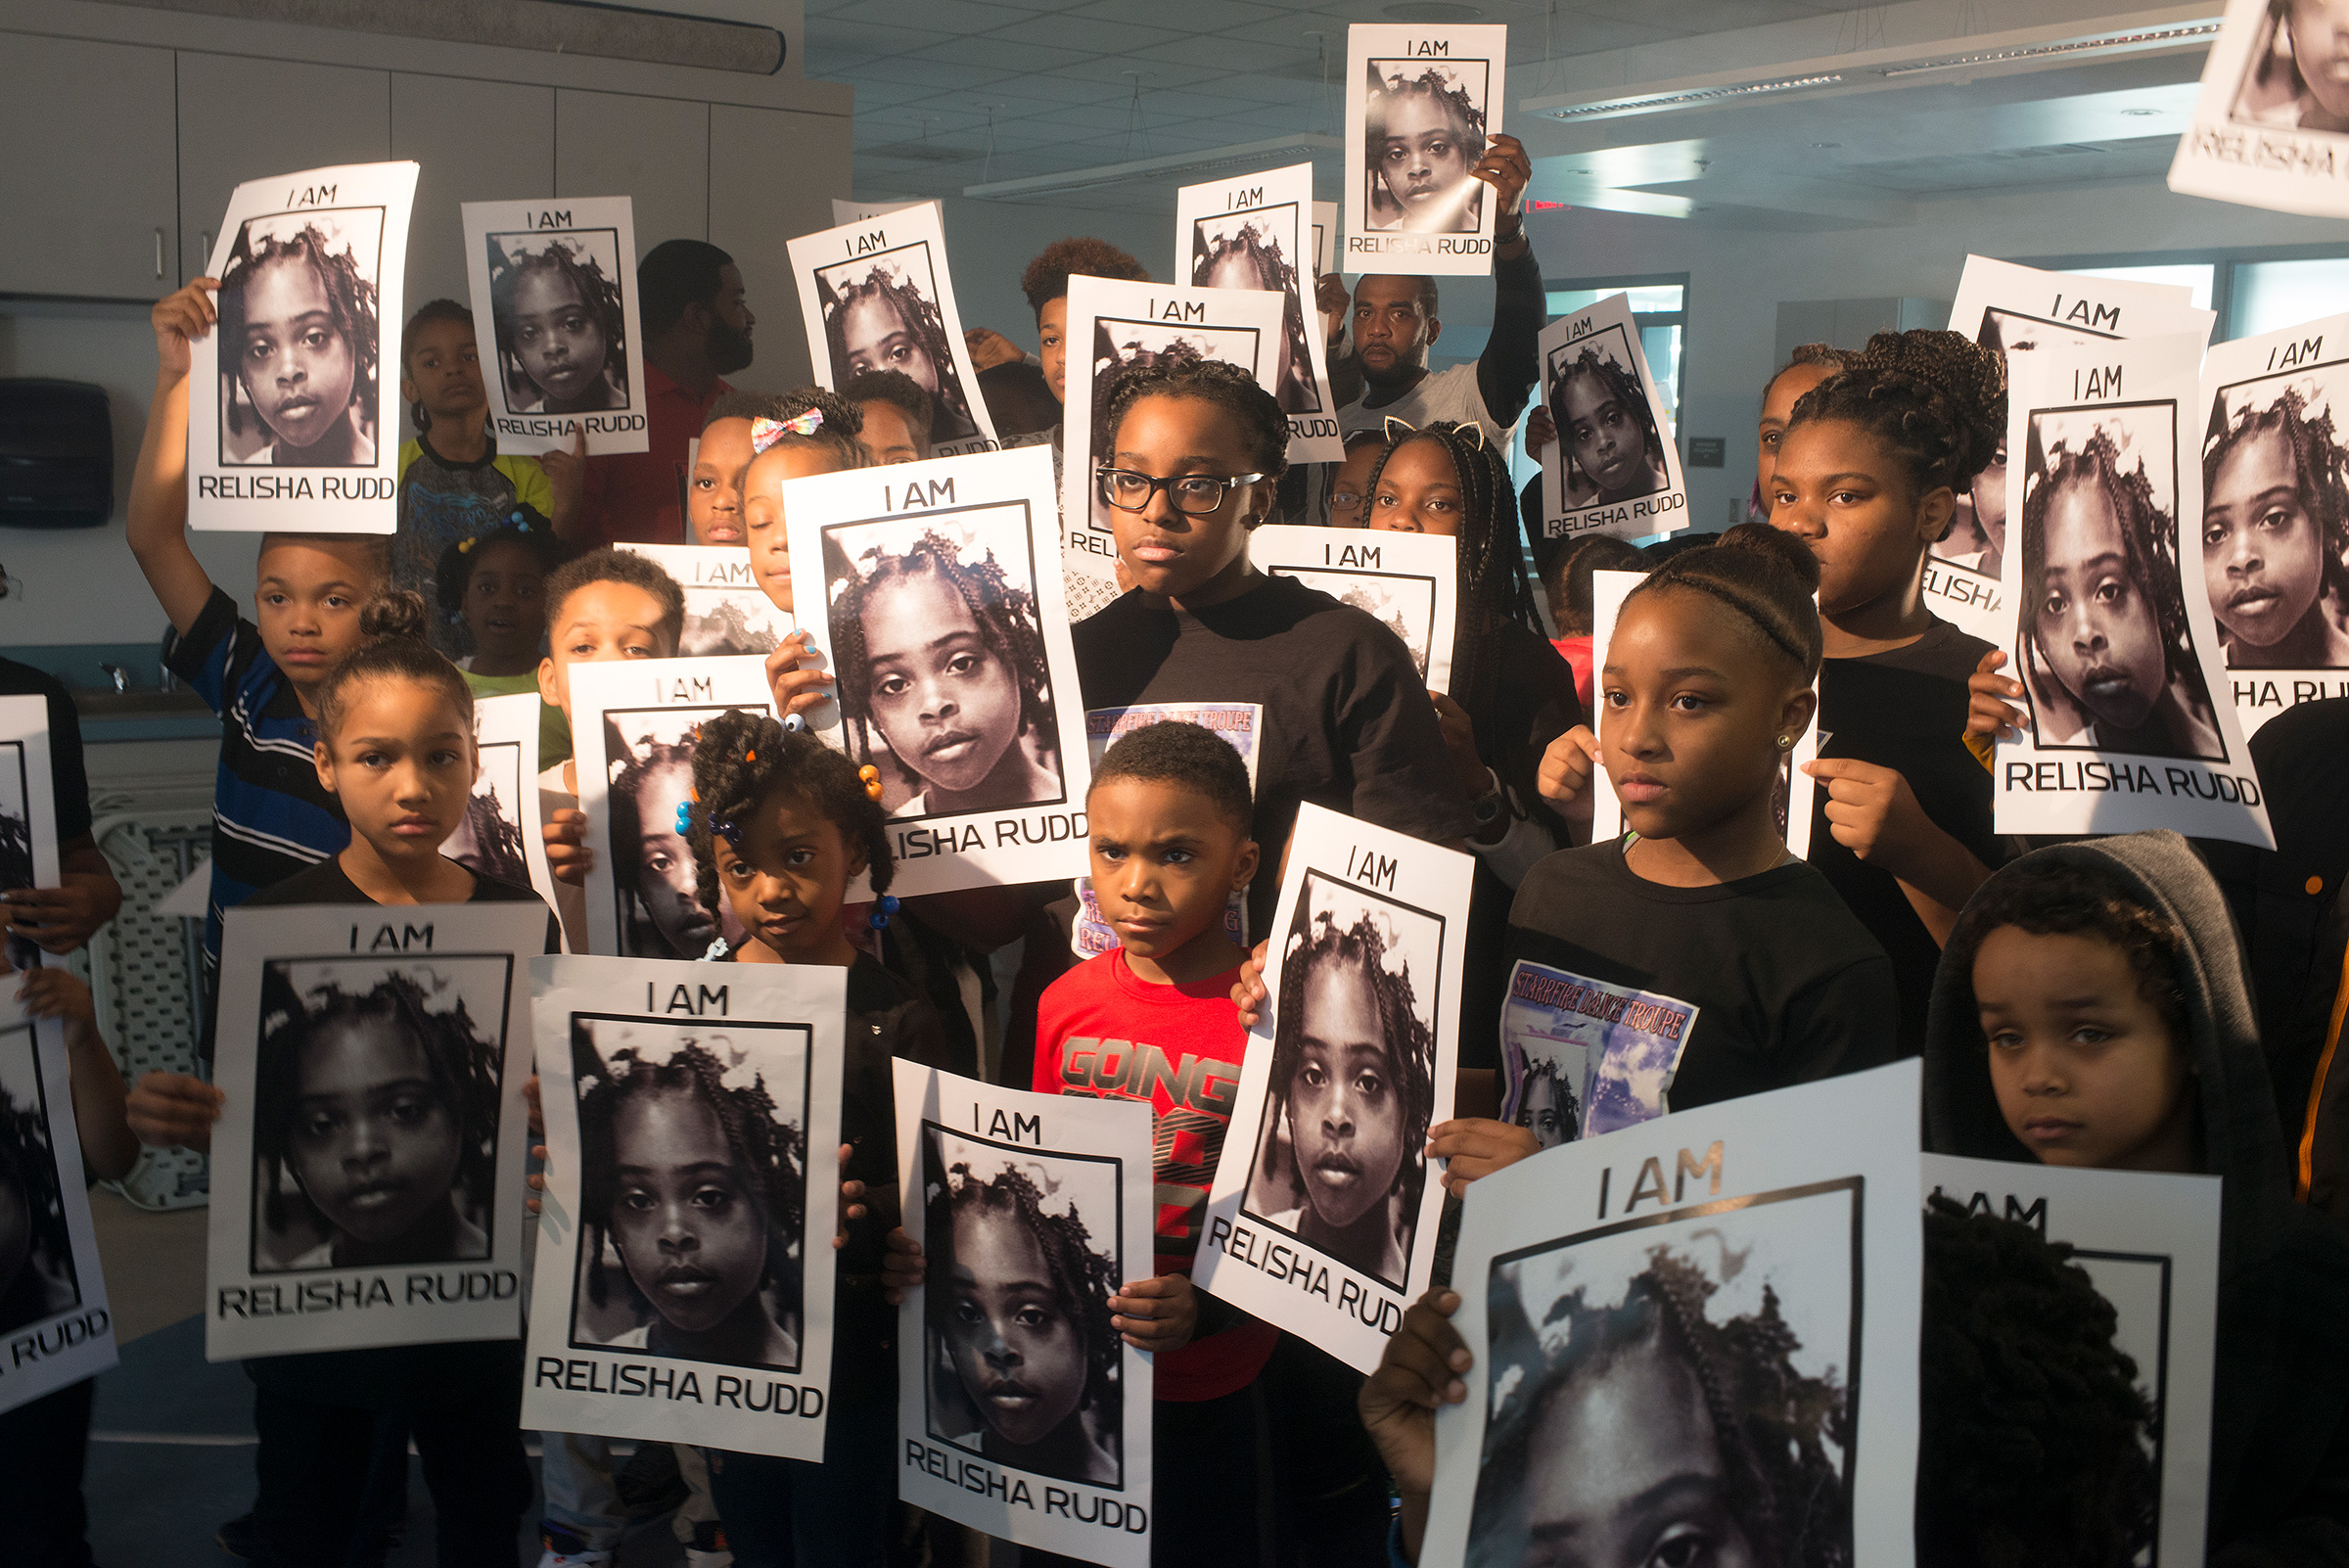 Community members participate in a remembrance celebration of Relisha Rudd at the Deanwood Recreation Center in Washington, D.C. on Feb. 27, 2016.